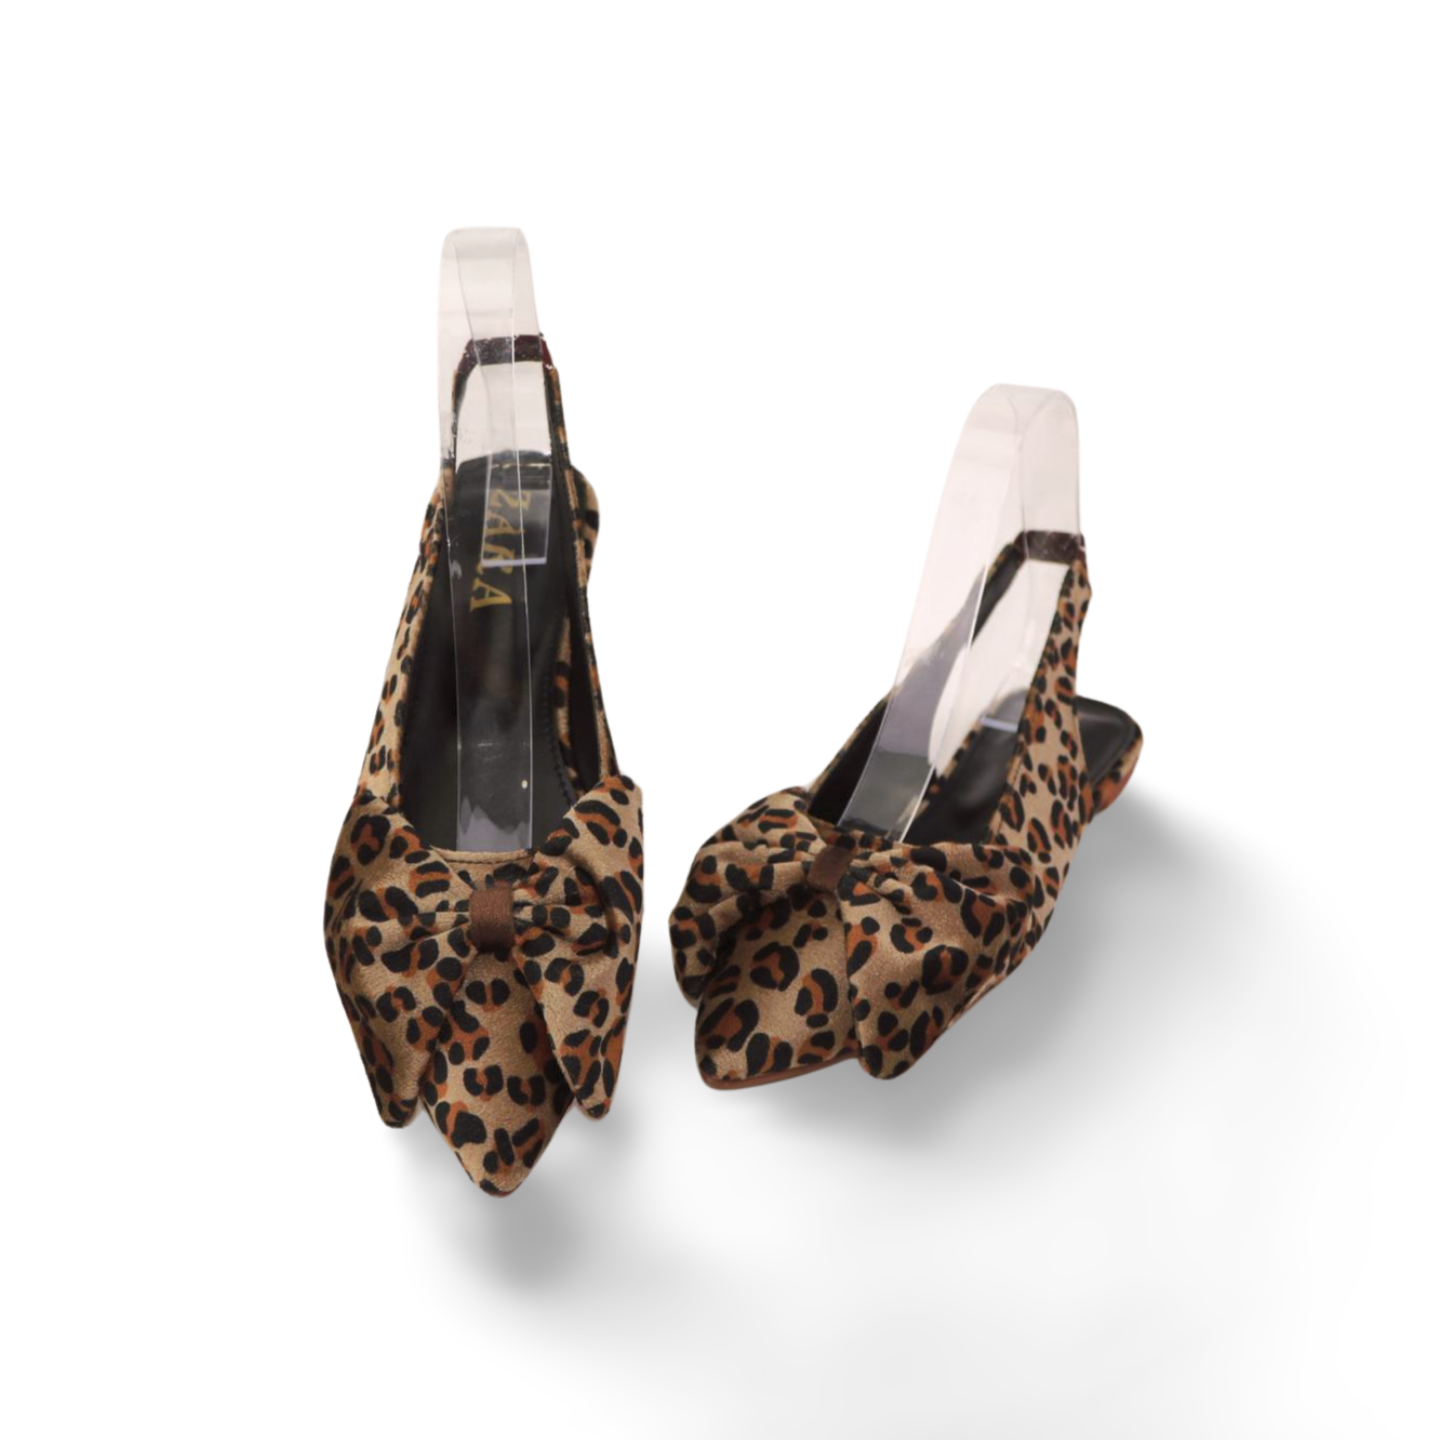 Trendy Leopard Print Sling Back Flats Mules - Comfortable and Stylish